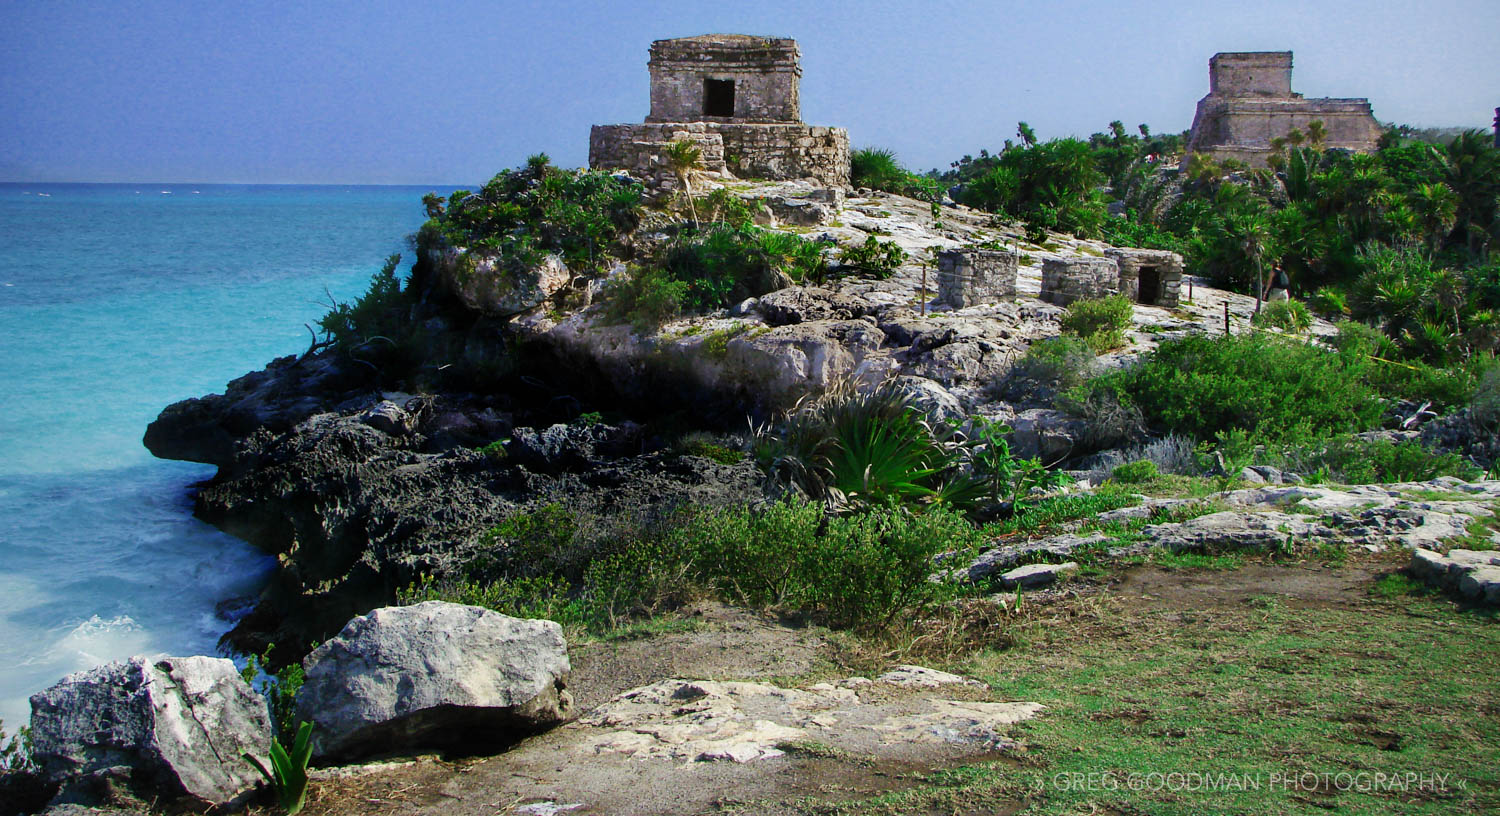 The Mayan ruins of Tulum in the Maya Riviera, Mexico